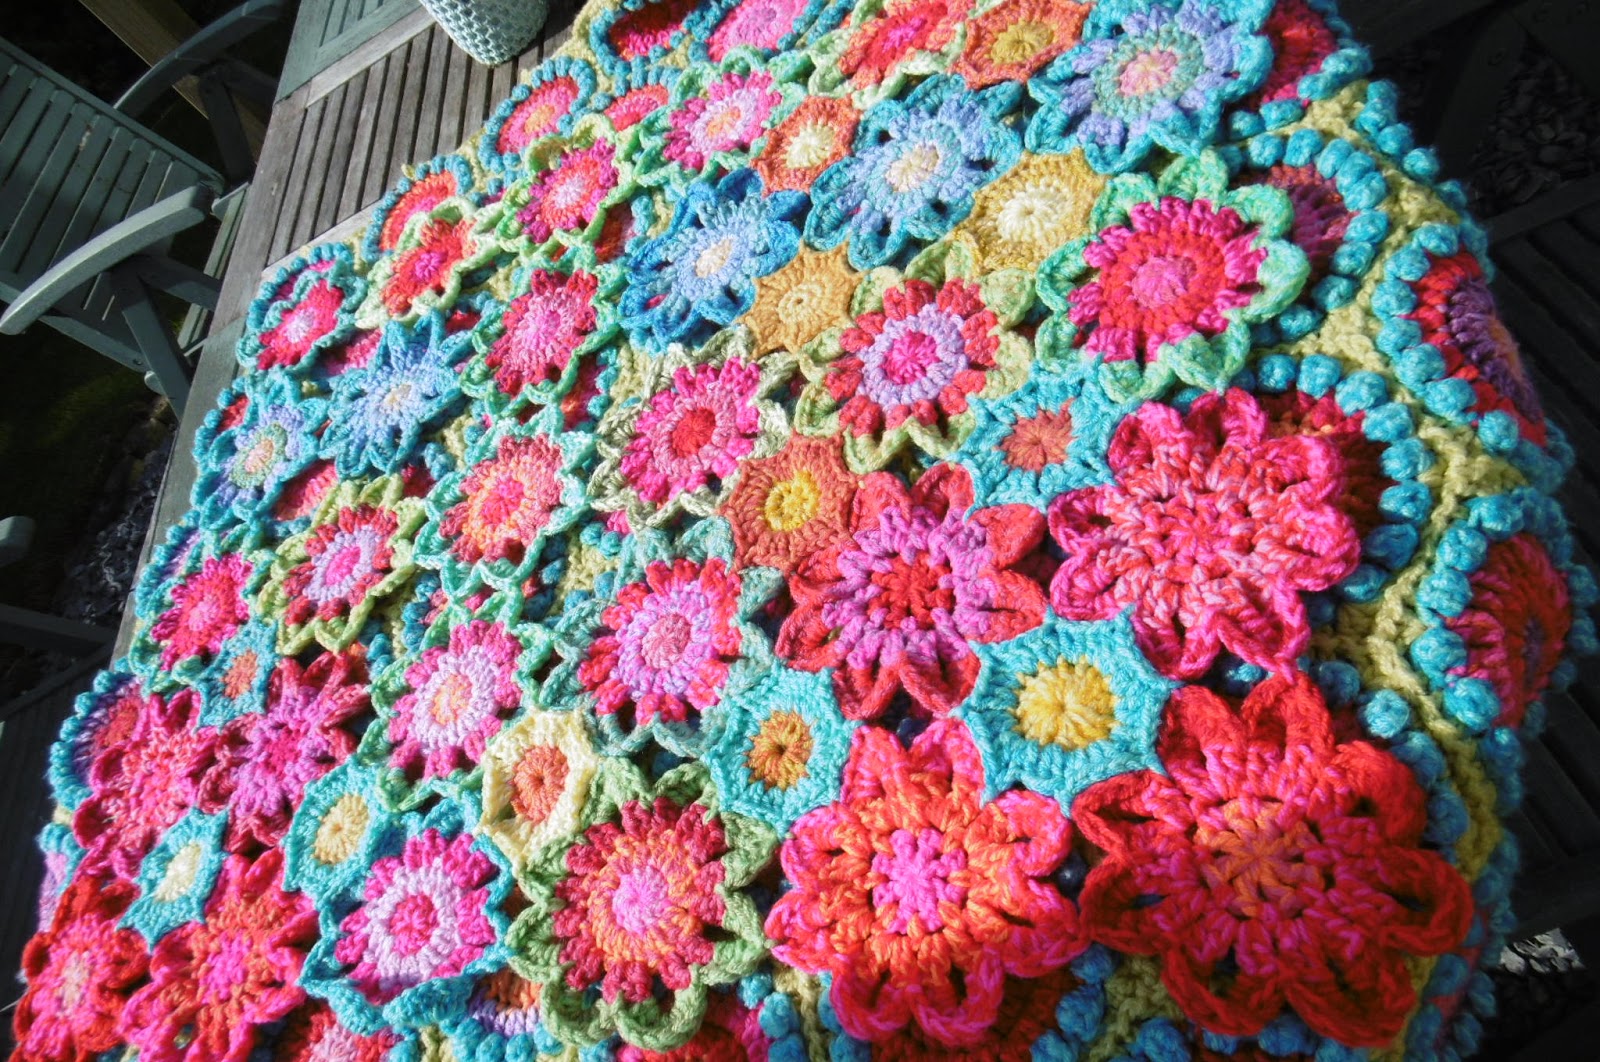 Susan Pinner: GRANNY SQUARE HOME PROJECT..WRAPPED CUSHION